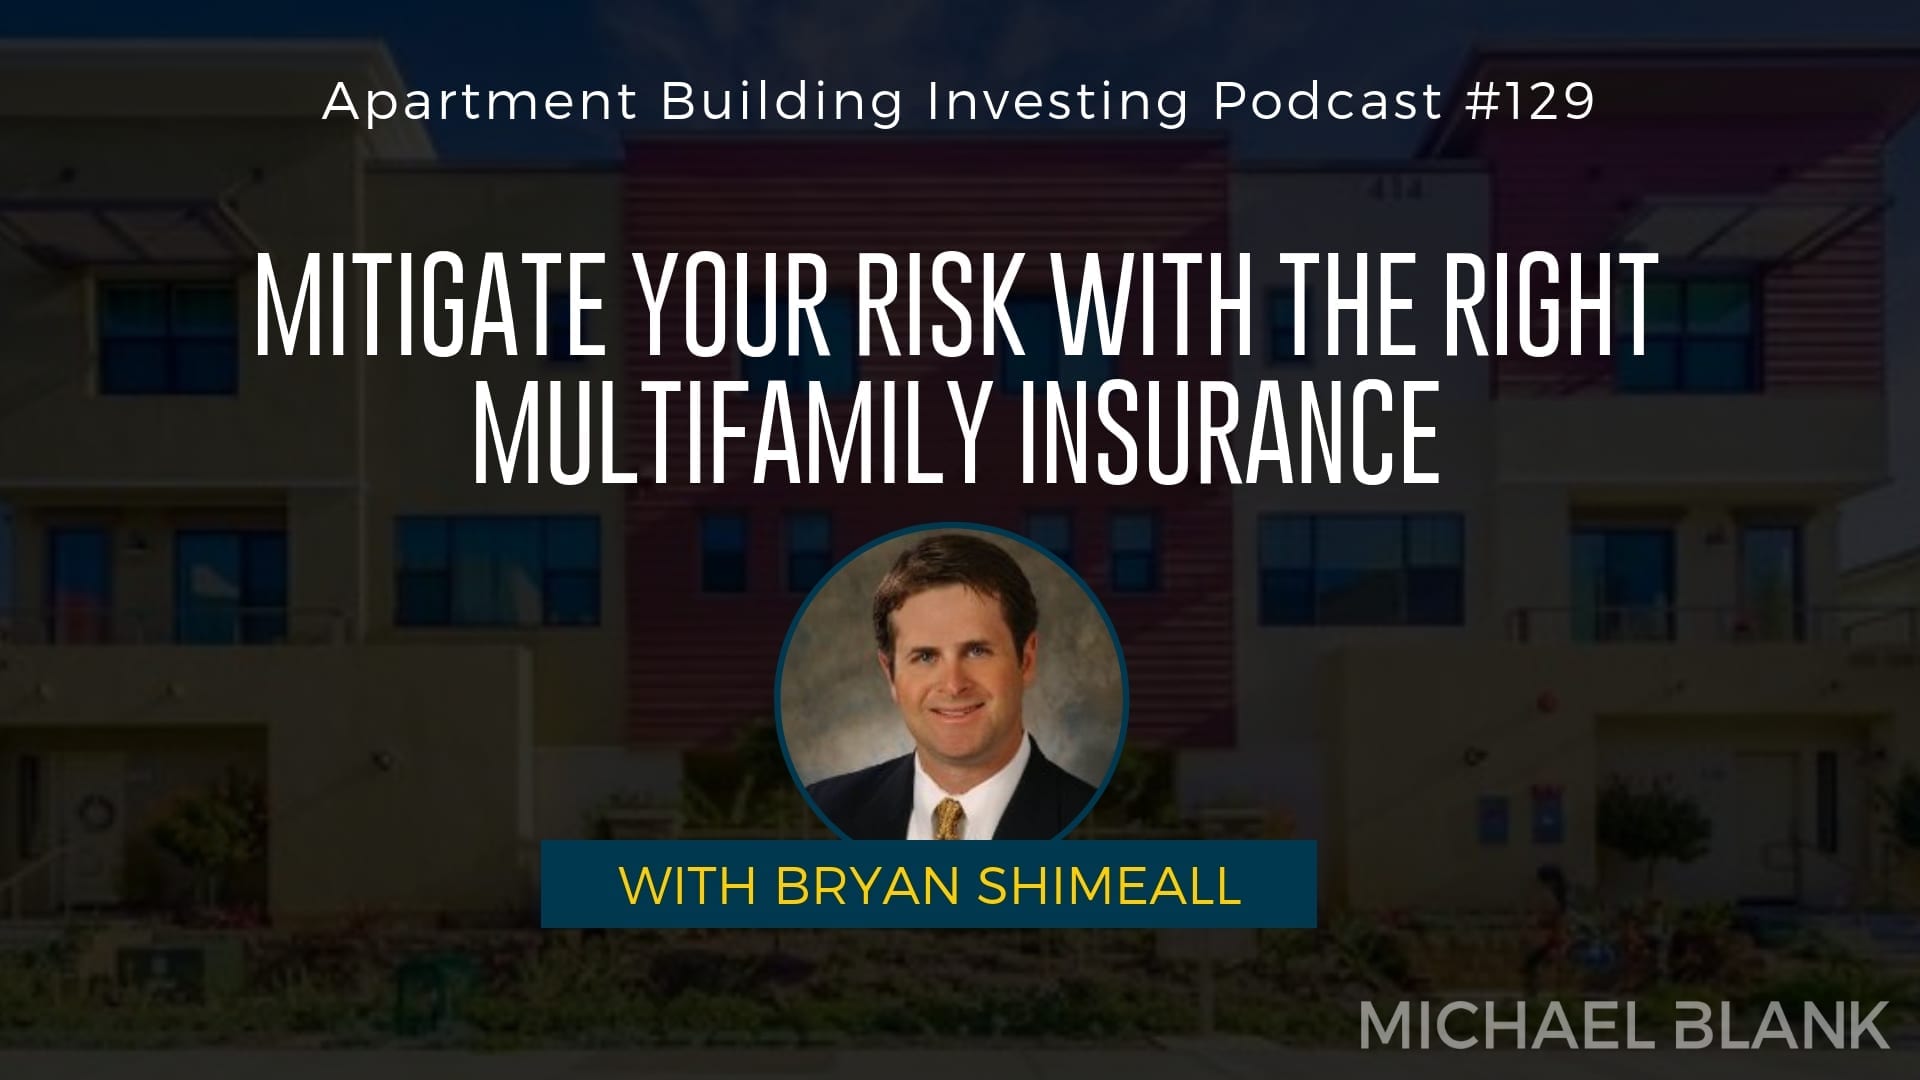 MB 129: Mitigate Your Risk with the Right Multifamily Insurance – With Bryan Shimeall